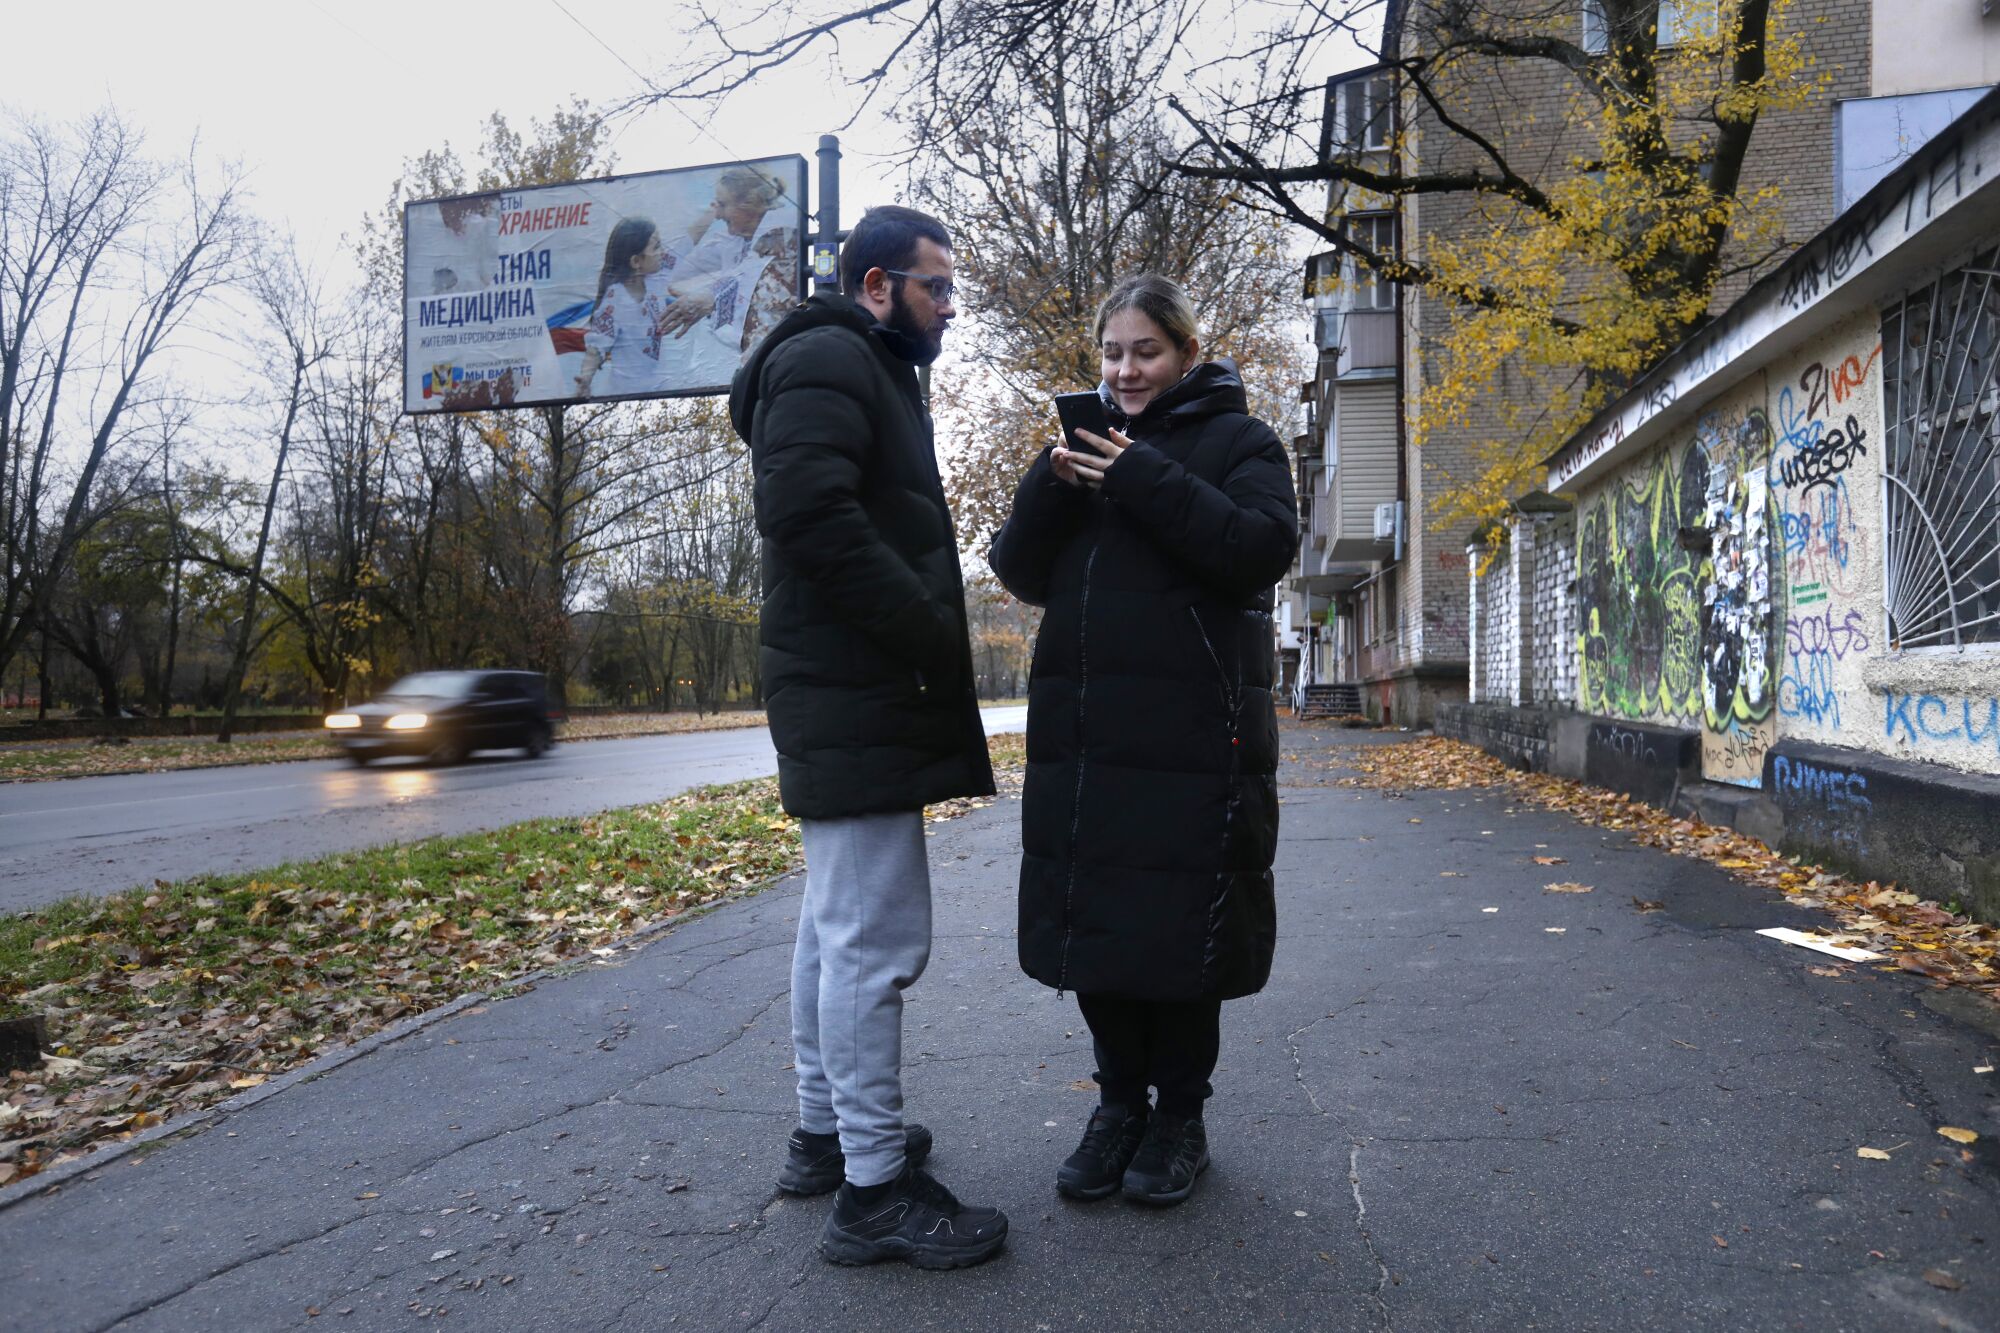 A bearded man, left, and a woman holding a cellphone, both in dark winter jackets, stand alongside a road near buildings